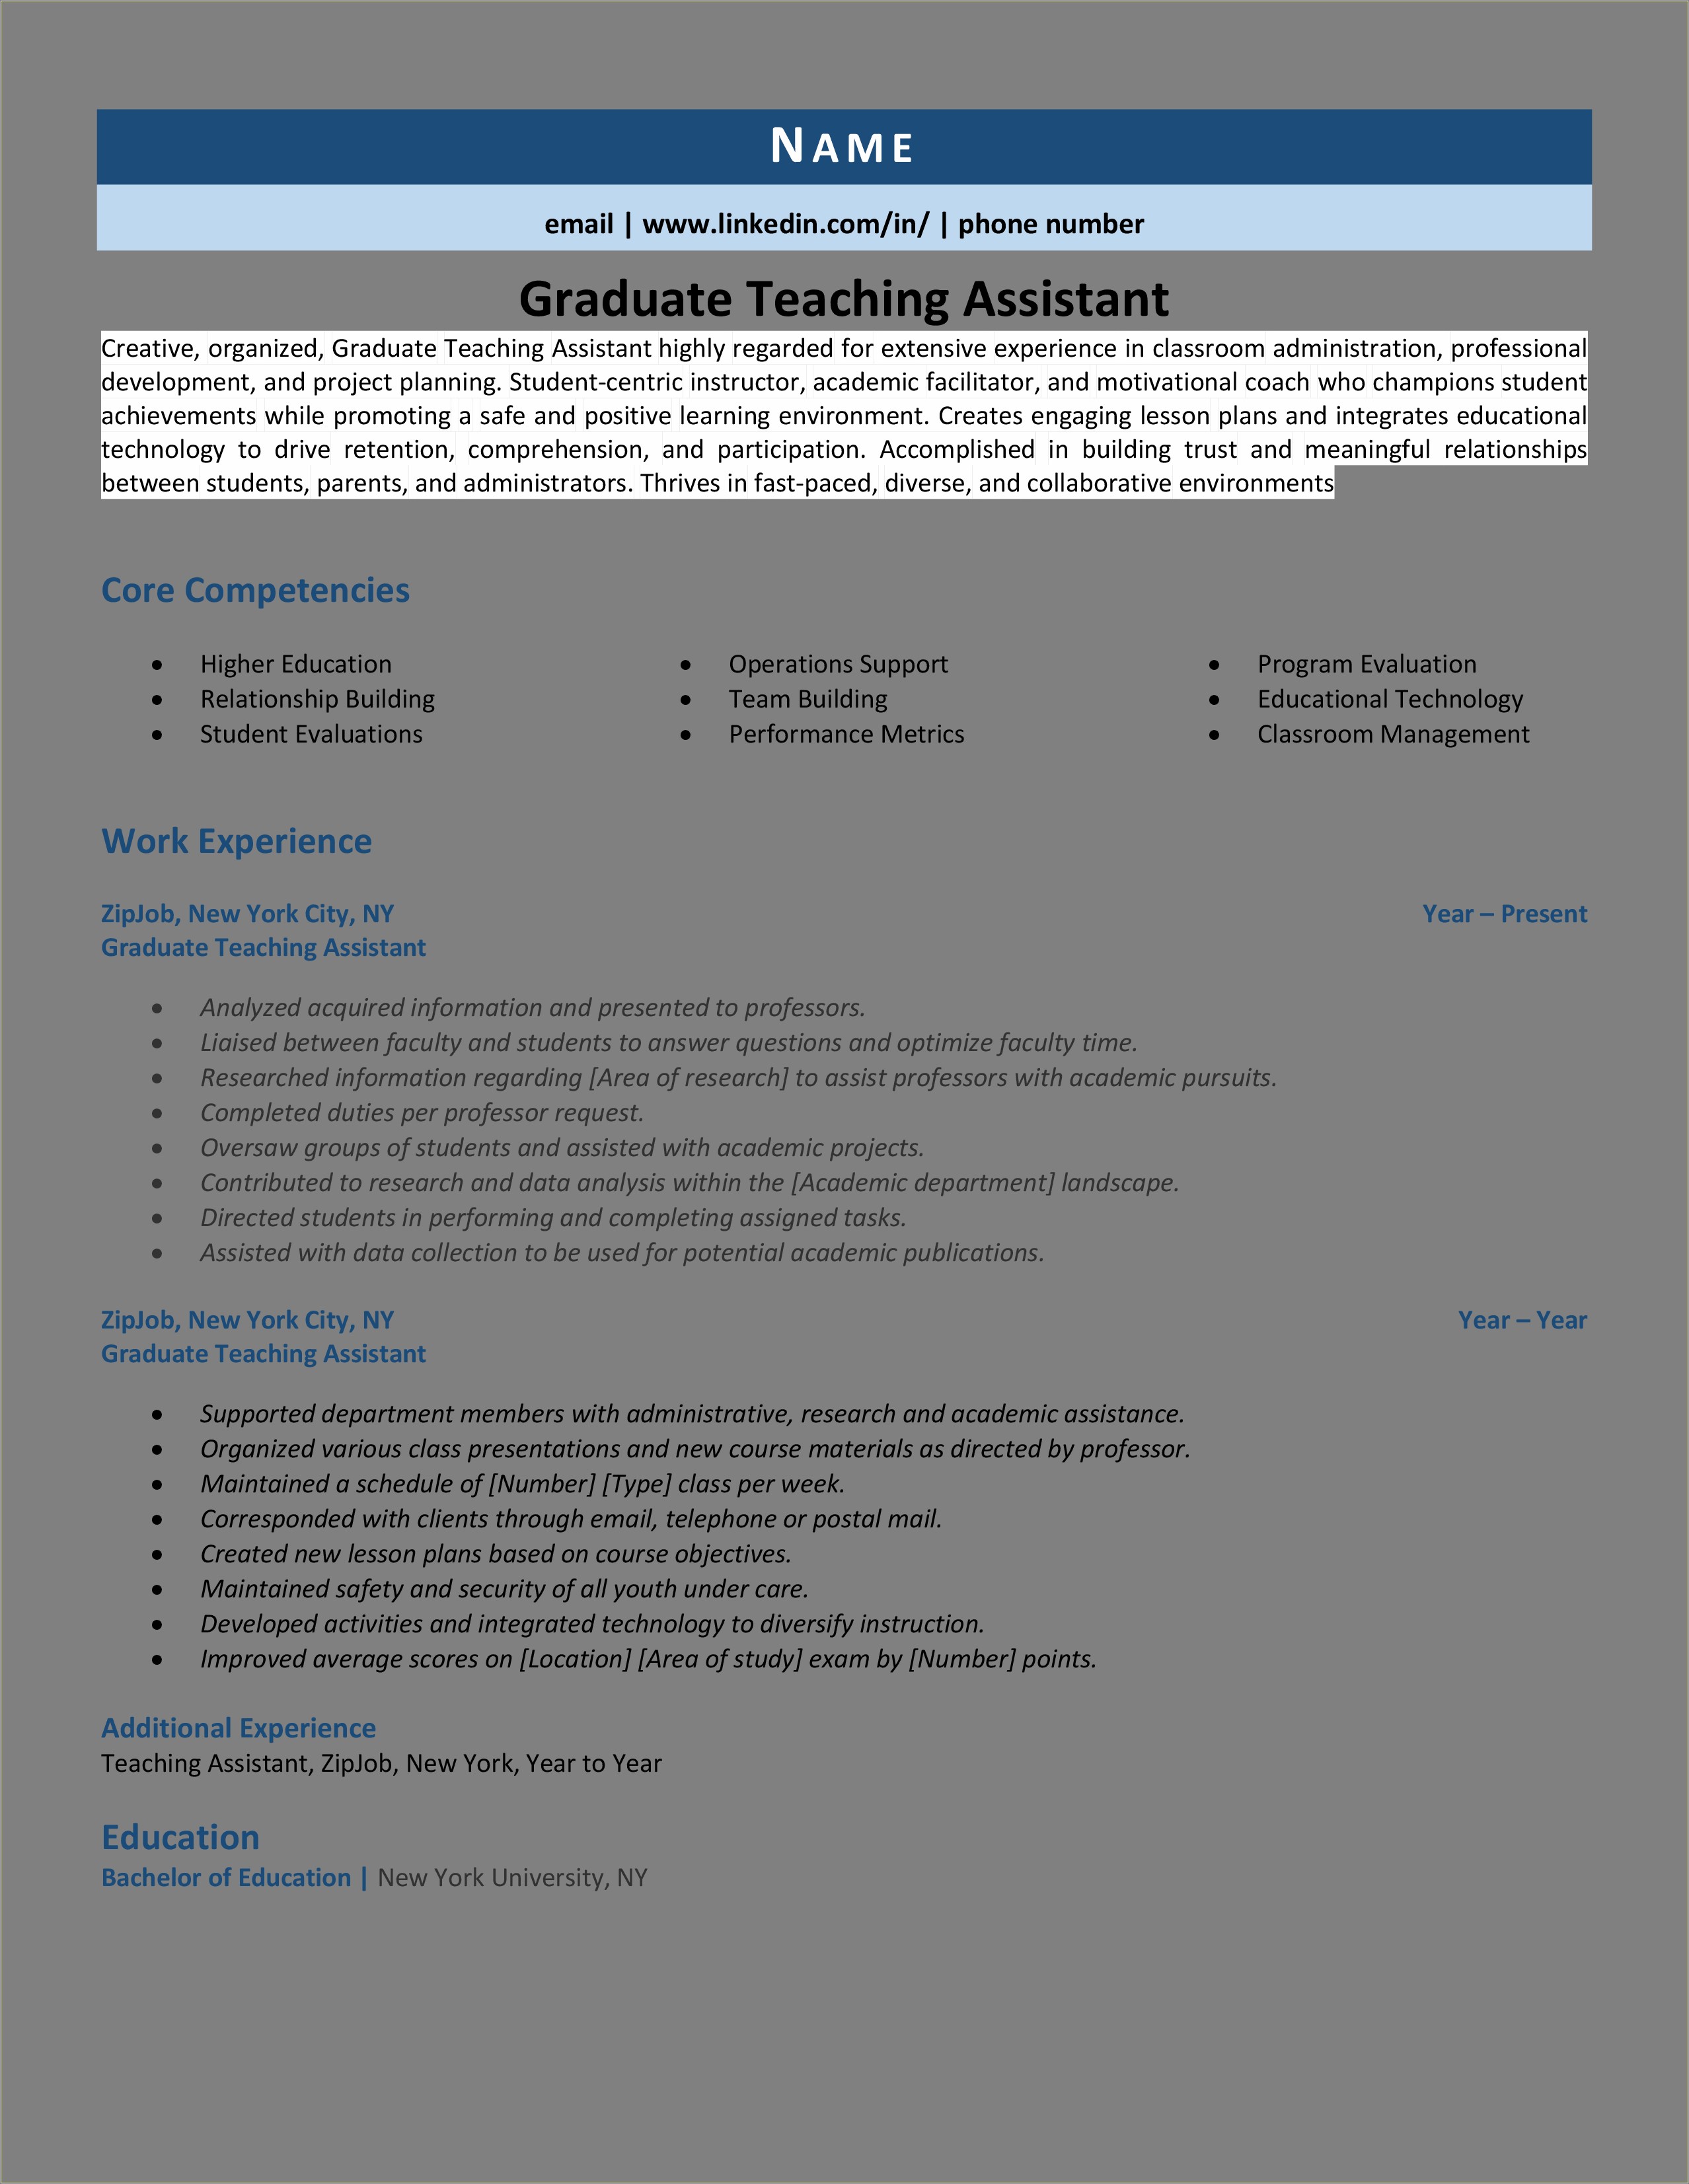 Resume An Experience Higher Education Administrator